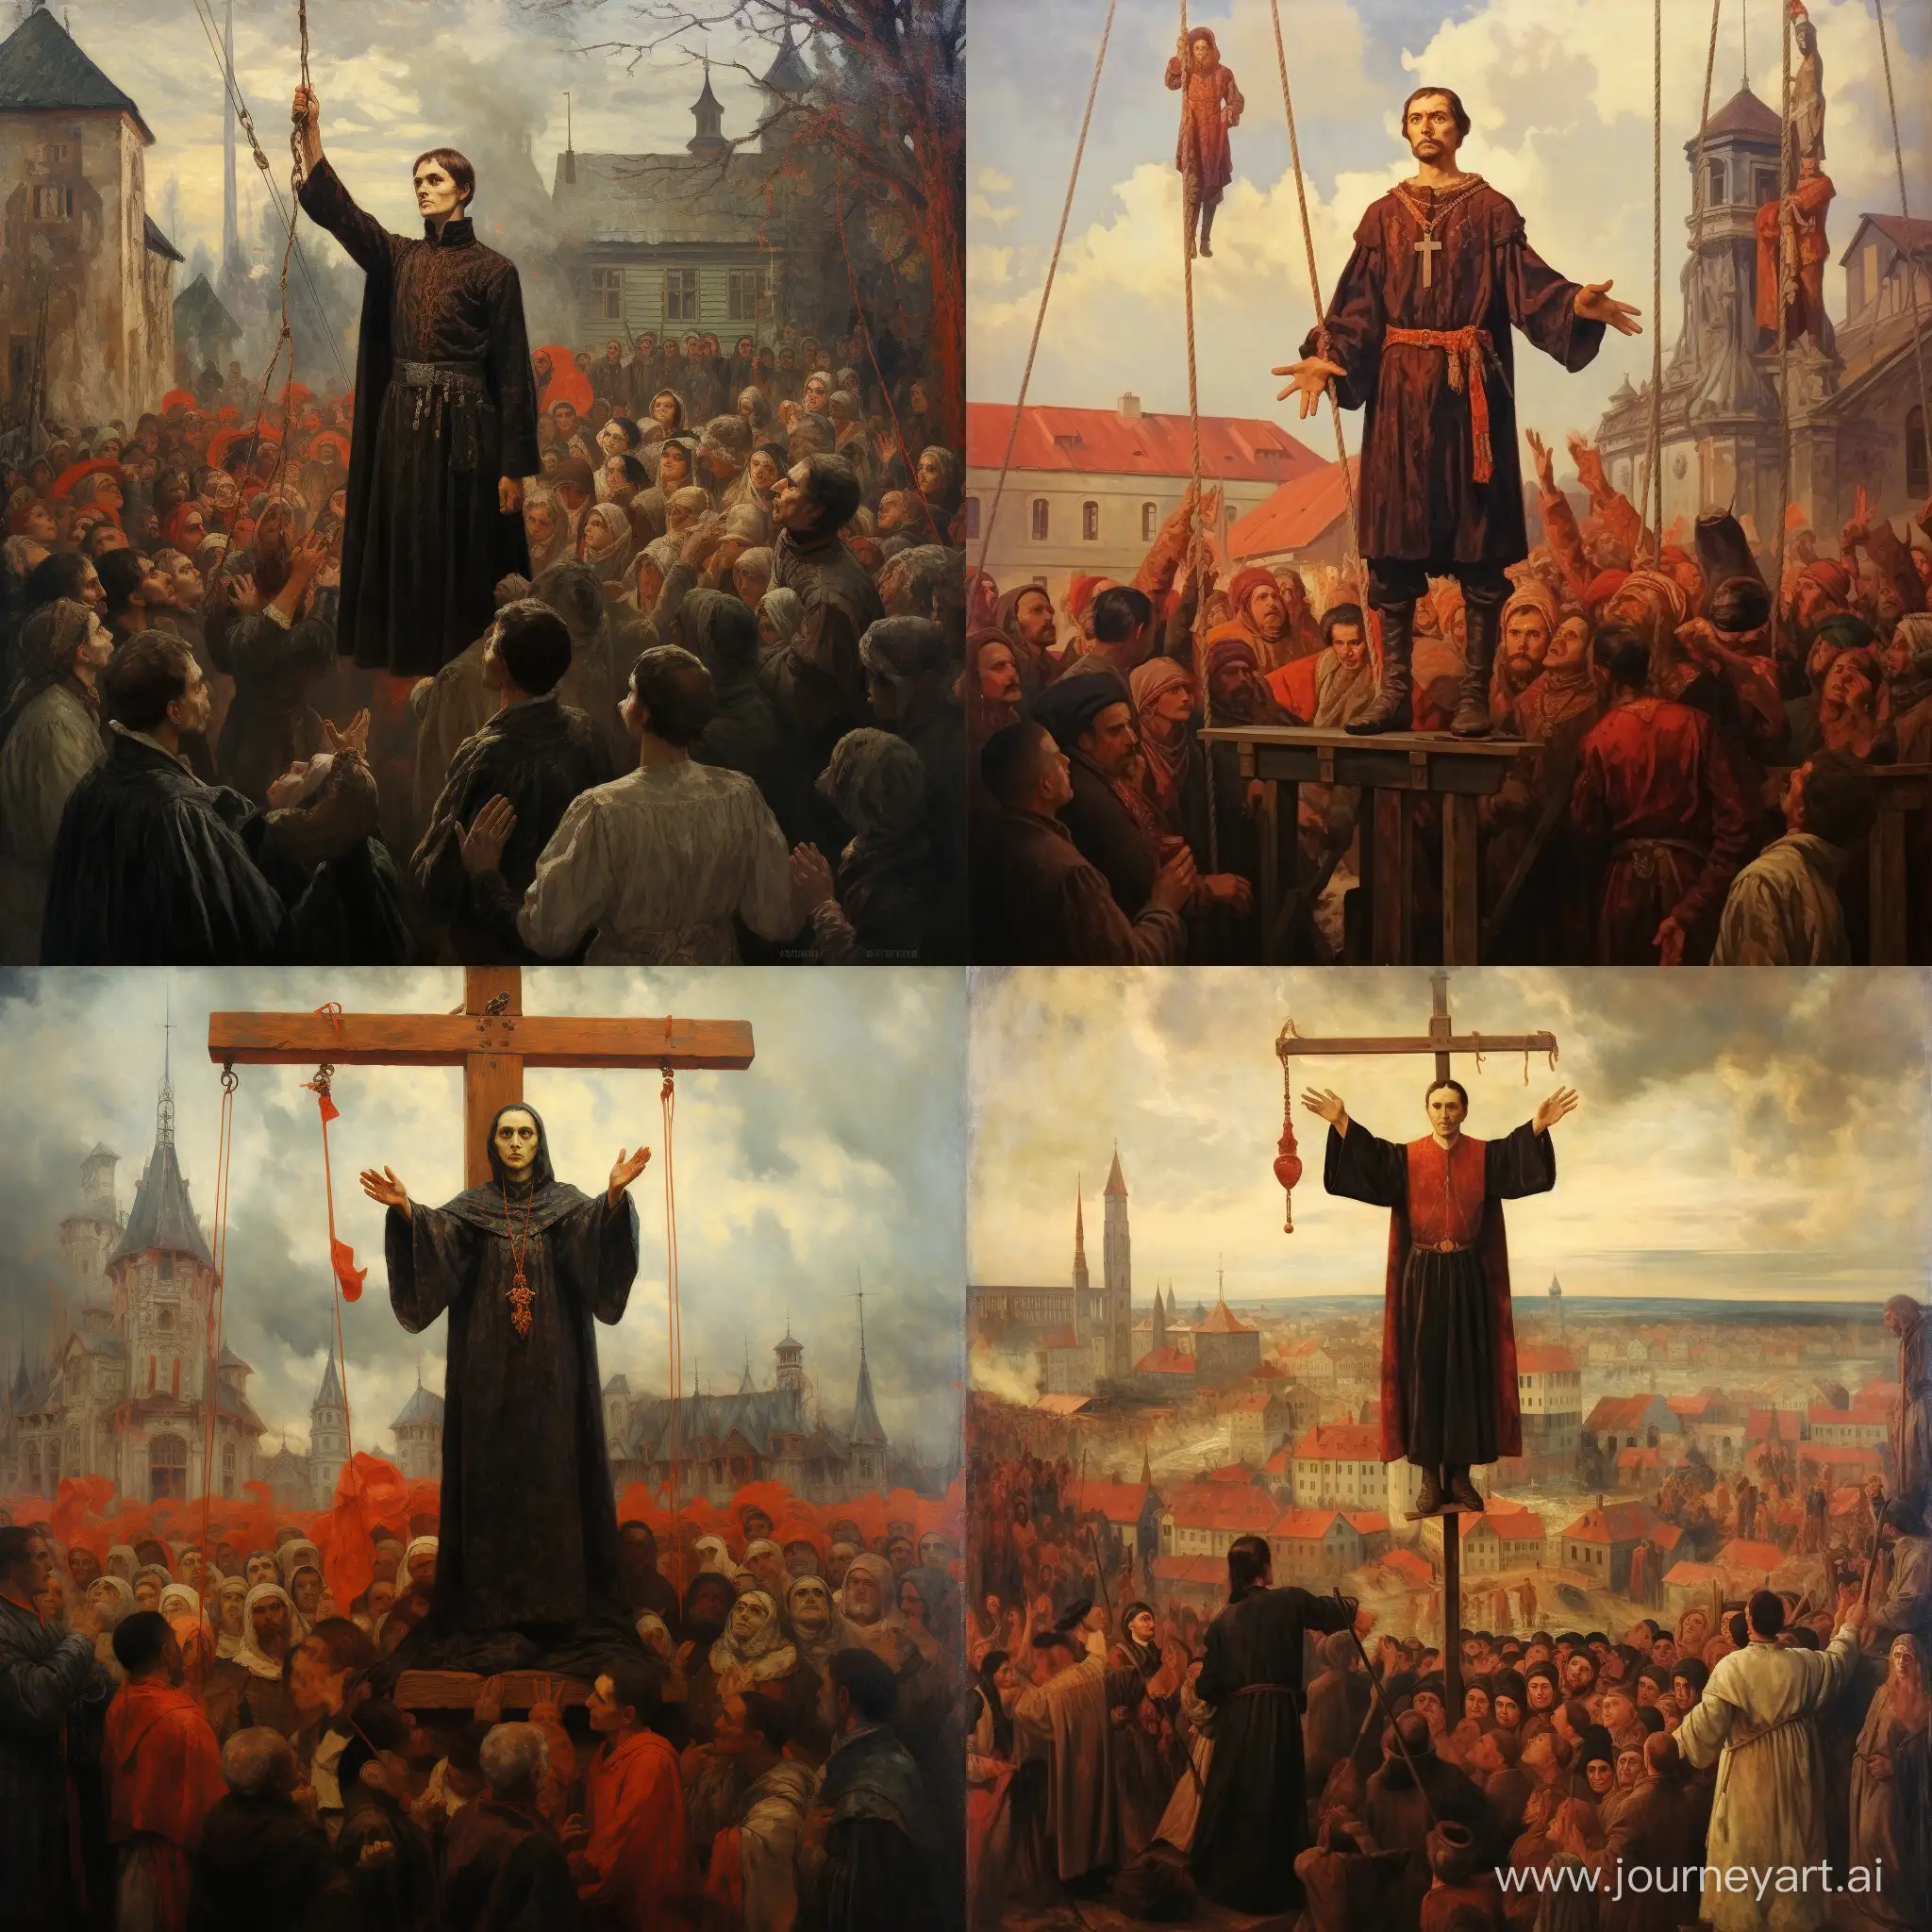 Dobrynya-Nikitich-Heroic-Execution-Amidst-Medieval-Red-Square-Jubilation